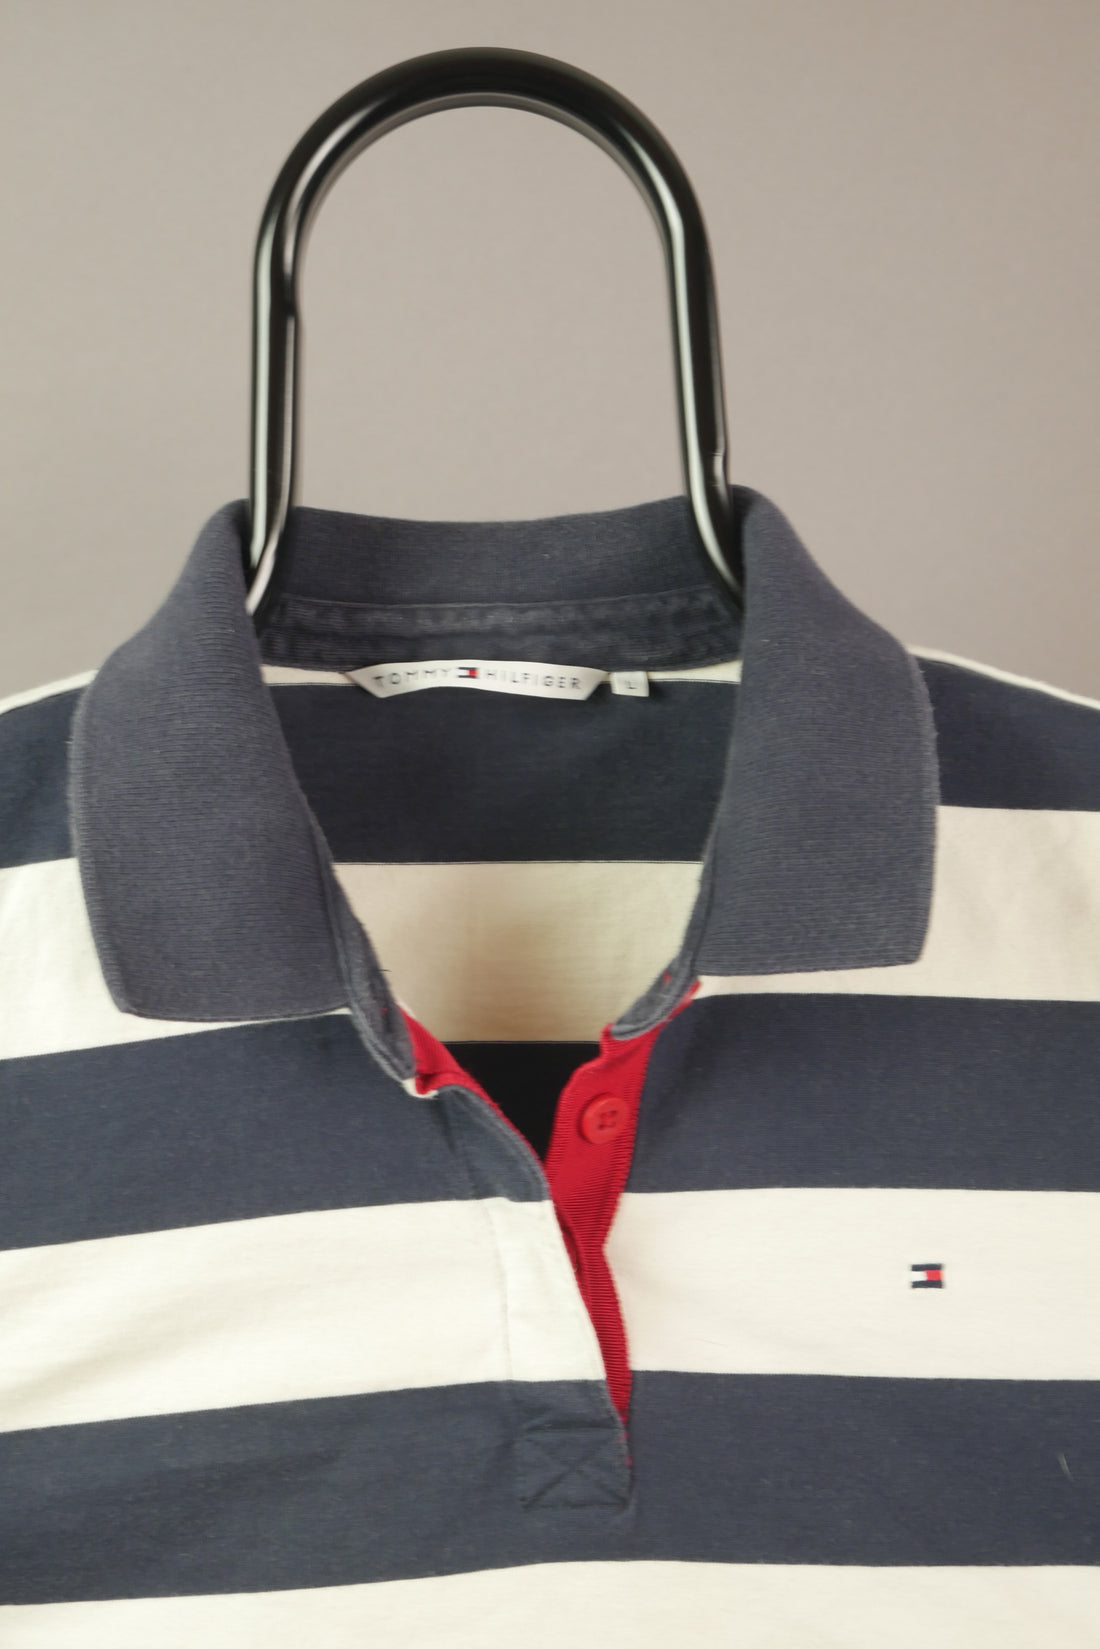 The Tommy Hilfiger Long Sleeve Striped Polo Shirt (Women's XS)